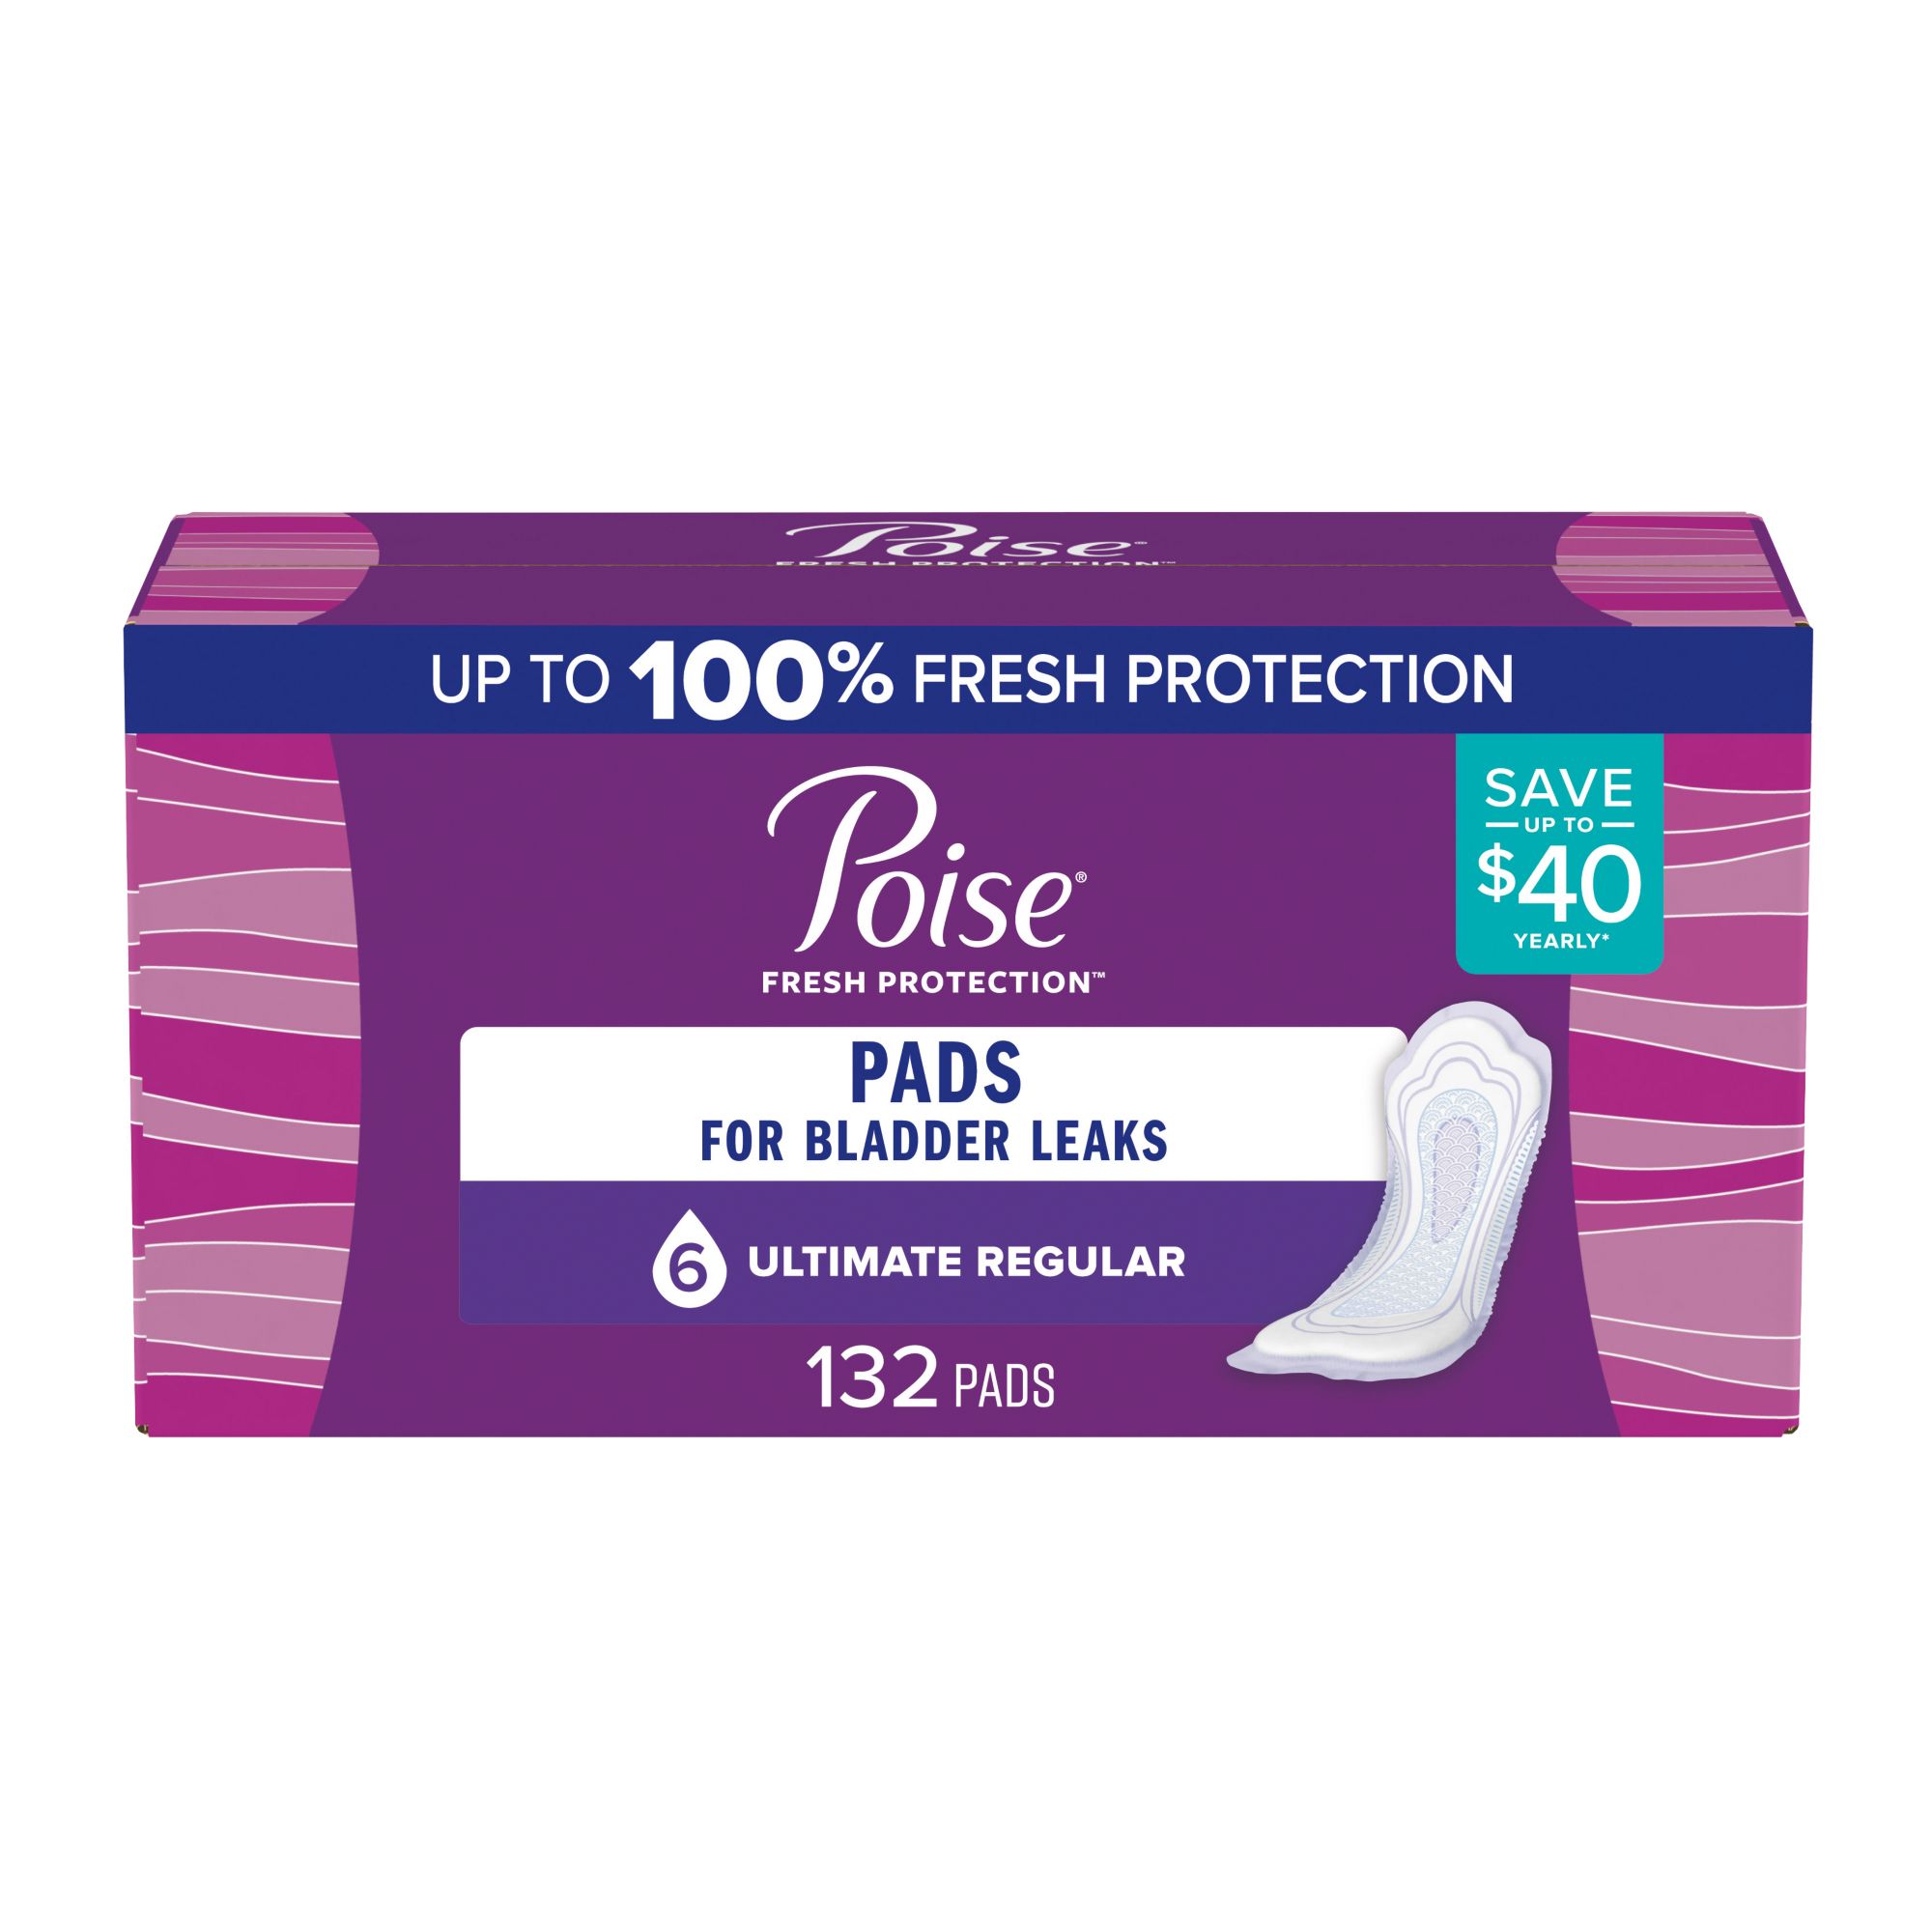 Drakes Online McDowall - Poise Overnight Absorbency Pads 8 Pack